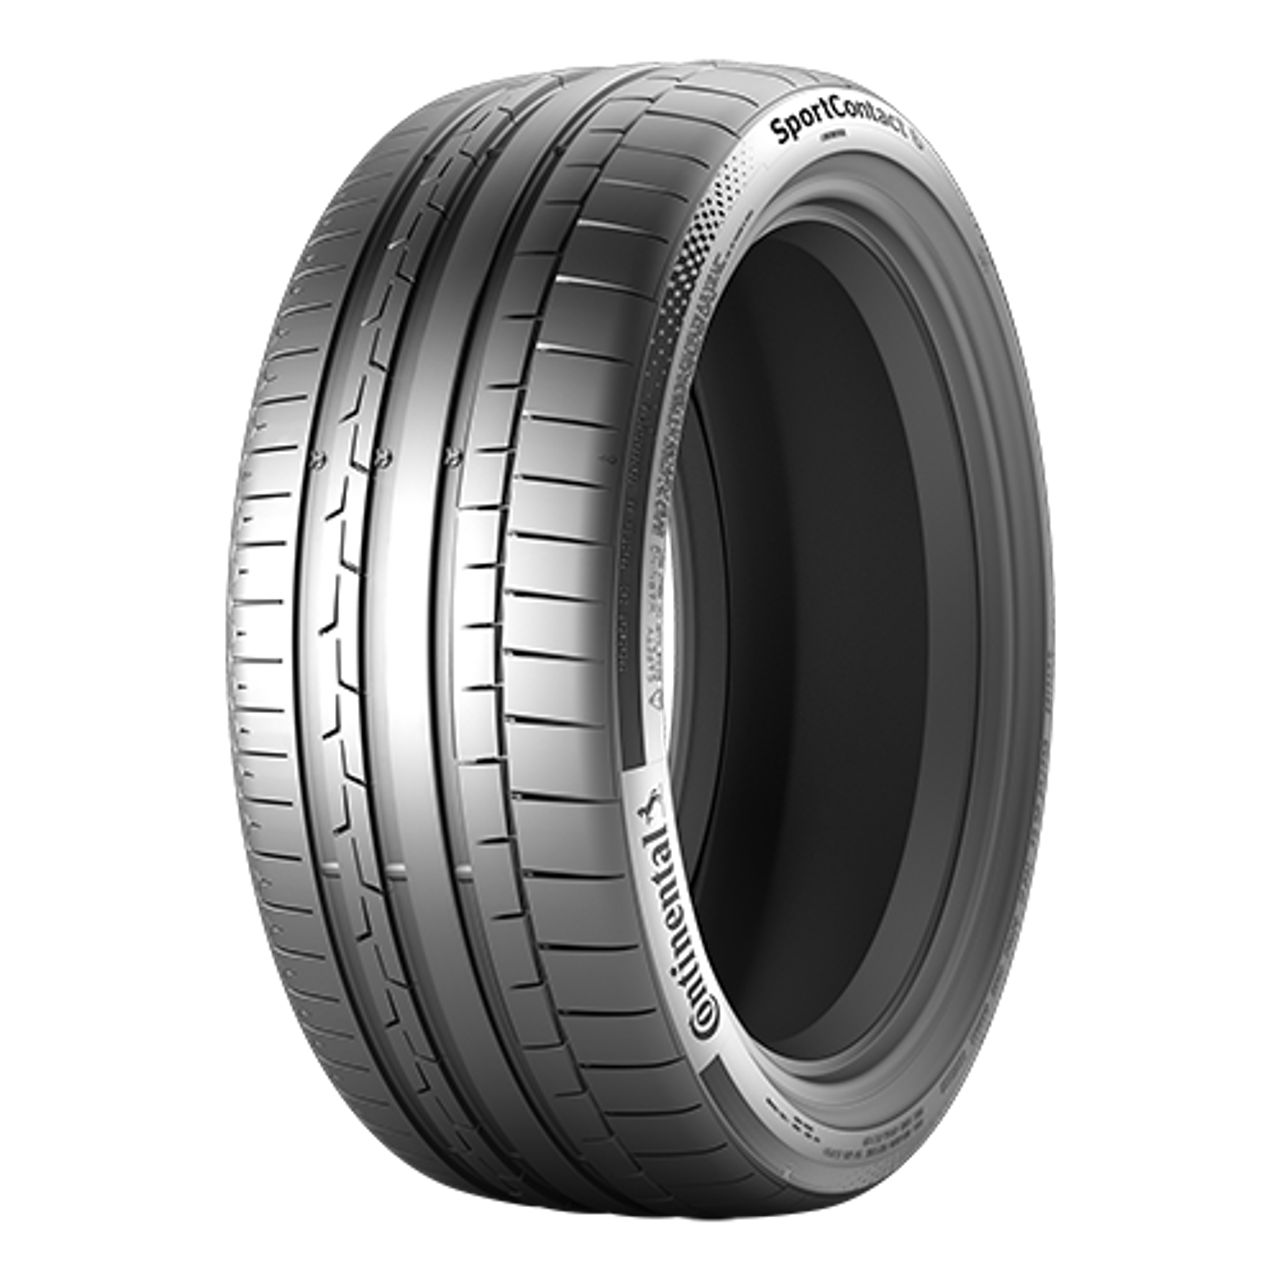 CONTINENTAL SPORTCONTACT 6 (AO) (EVc) 255/45R19 104Y FR